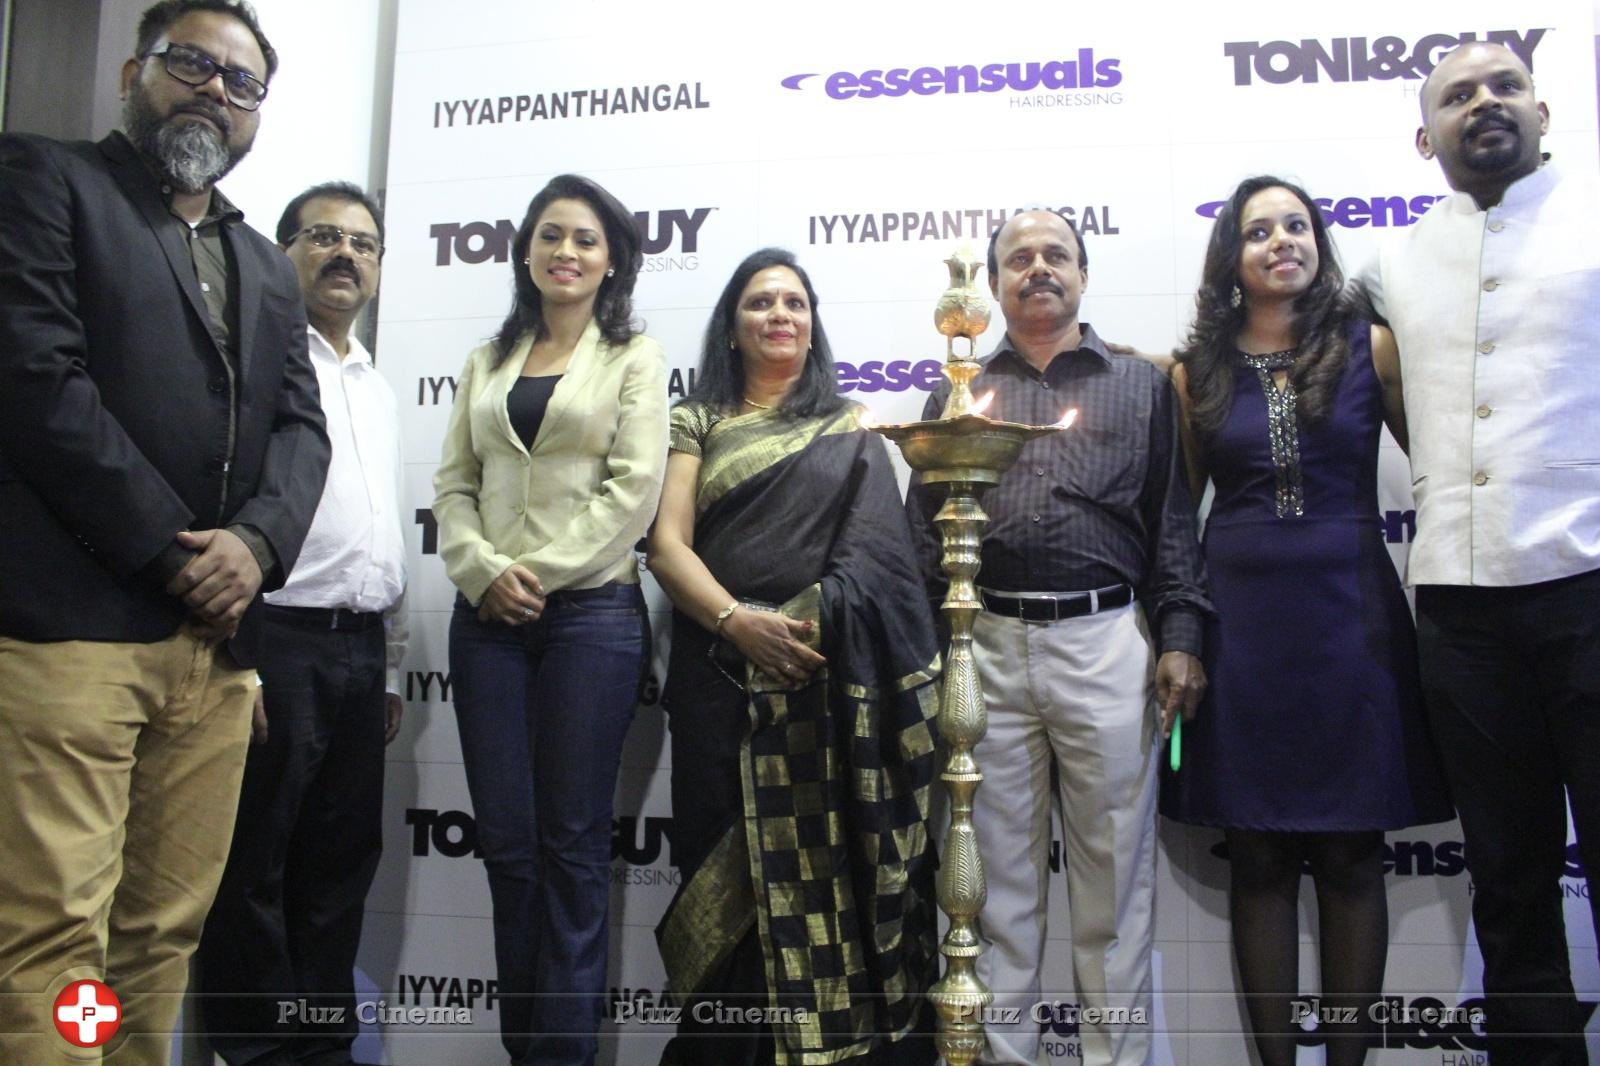 Toni and Guy Essensuals Salon Launch at Iyyappanthangal Photos | Picture 925474